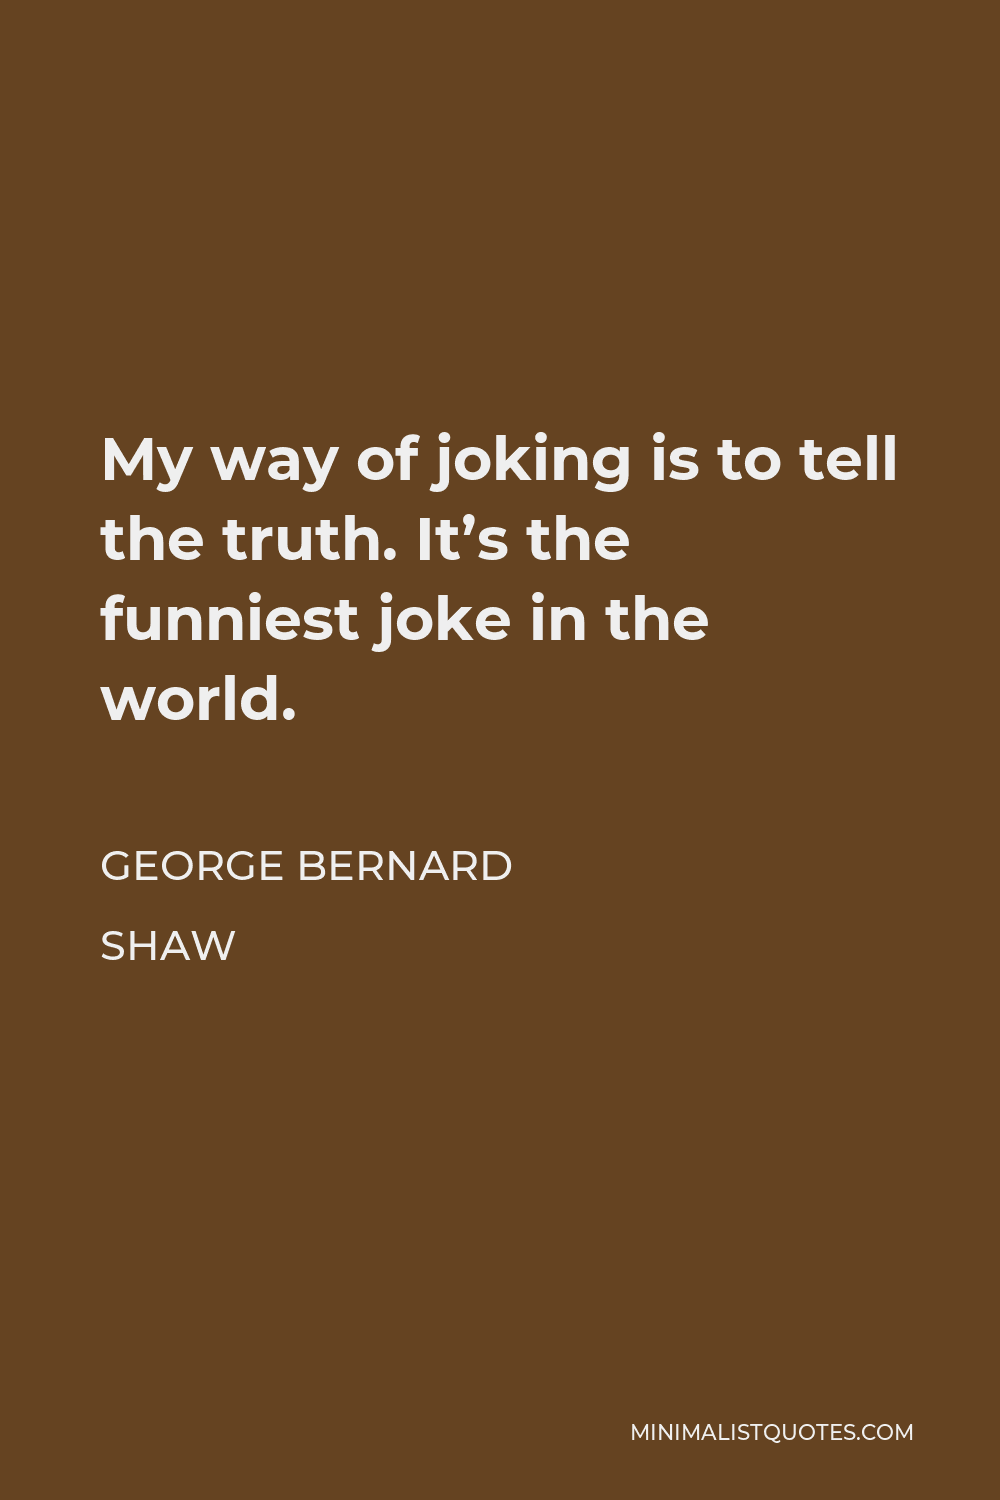 George Bernard Shaw Quote: My way of joking is to tell the truth. It's the  funniest joke in the world.